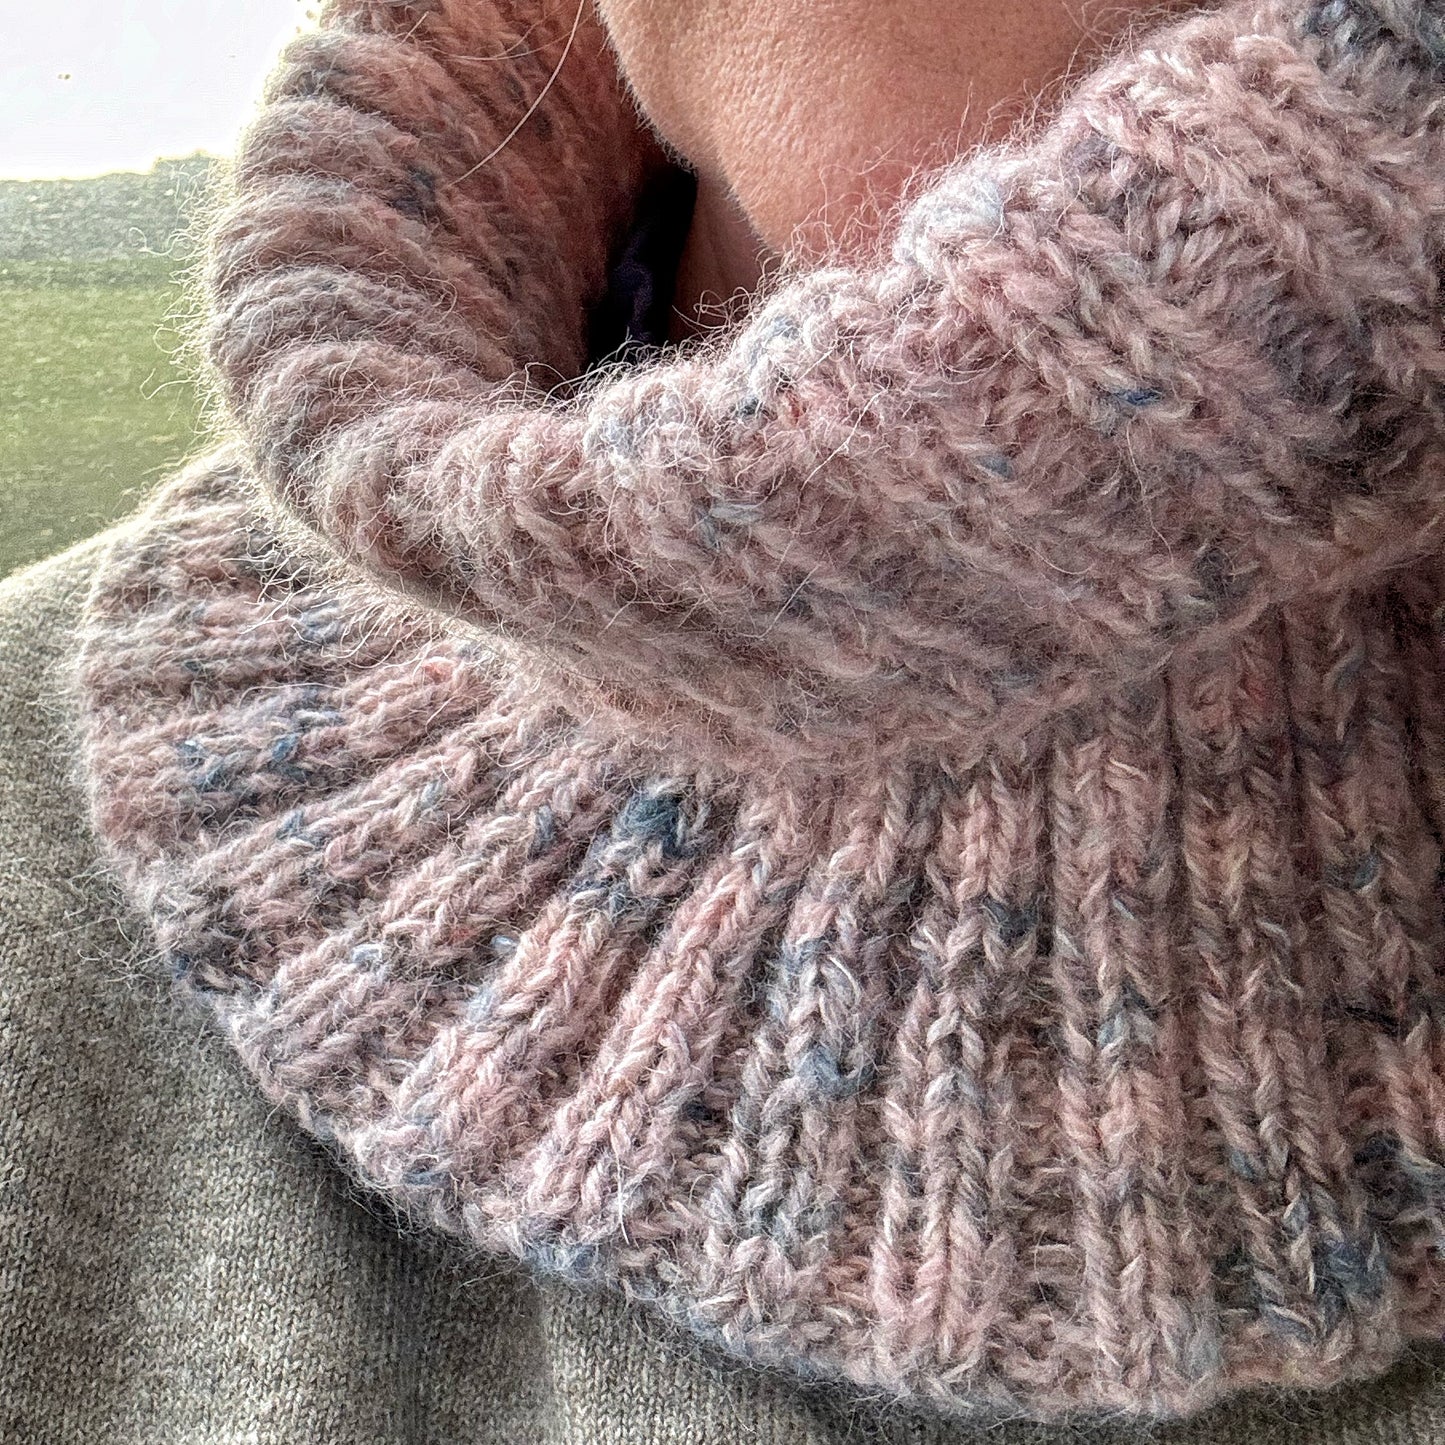 The Easy Cosy Cowl Kit by Mamie and Florrie - Paragliders Over Mam Tor